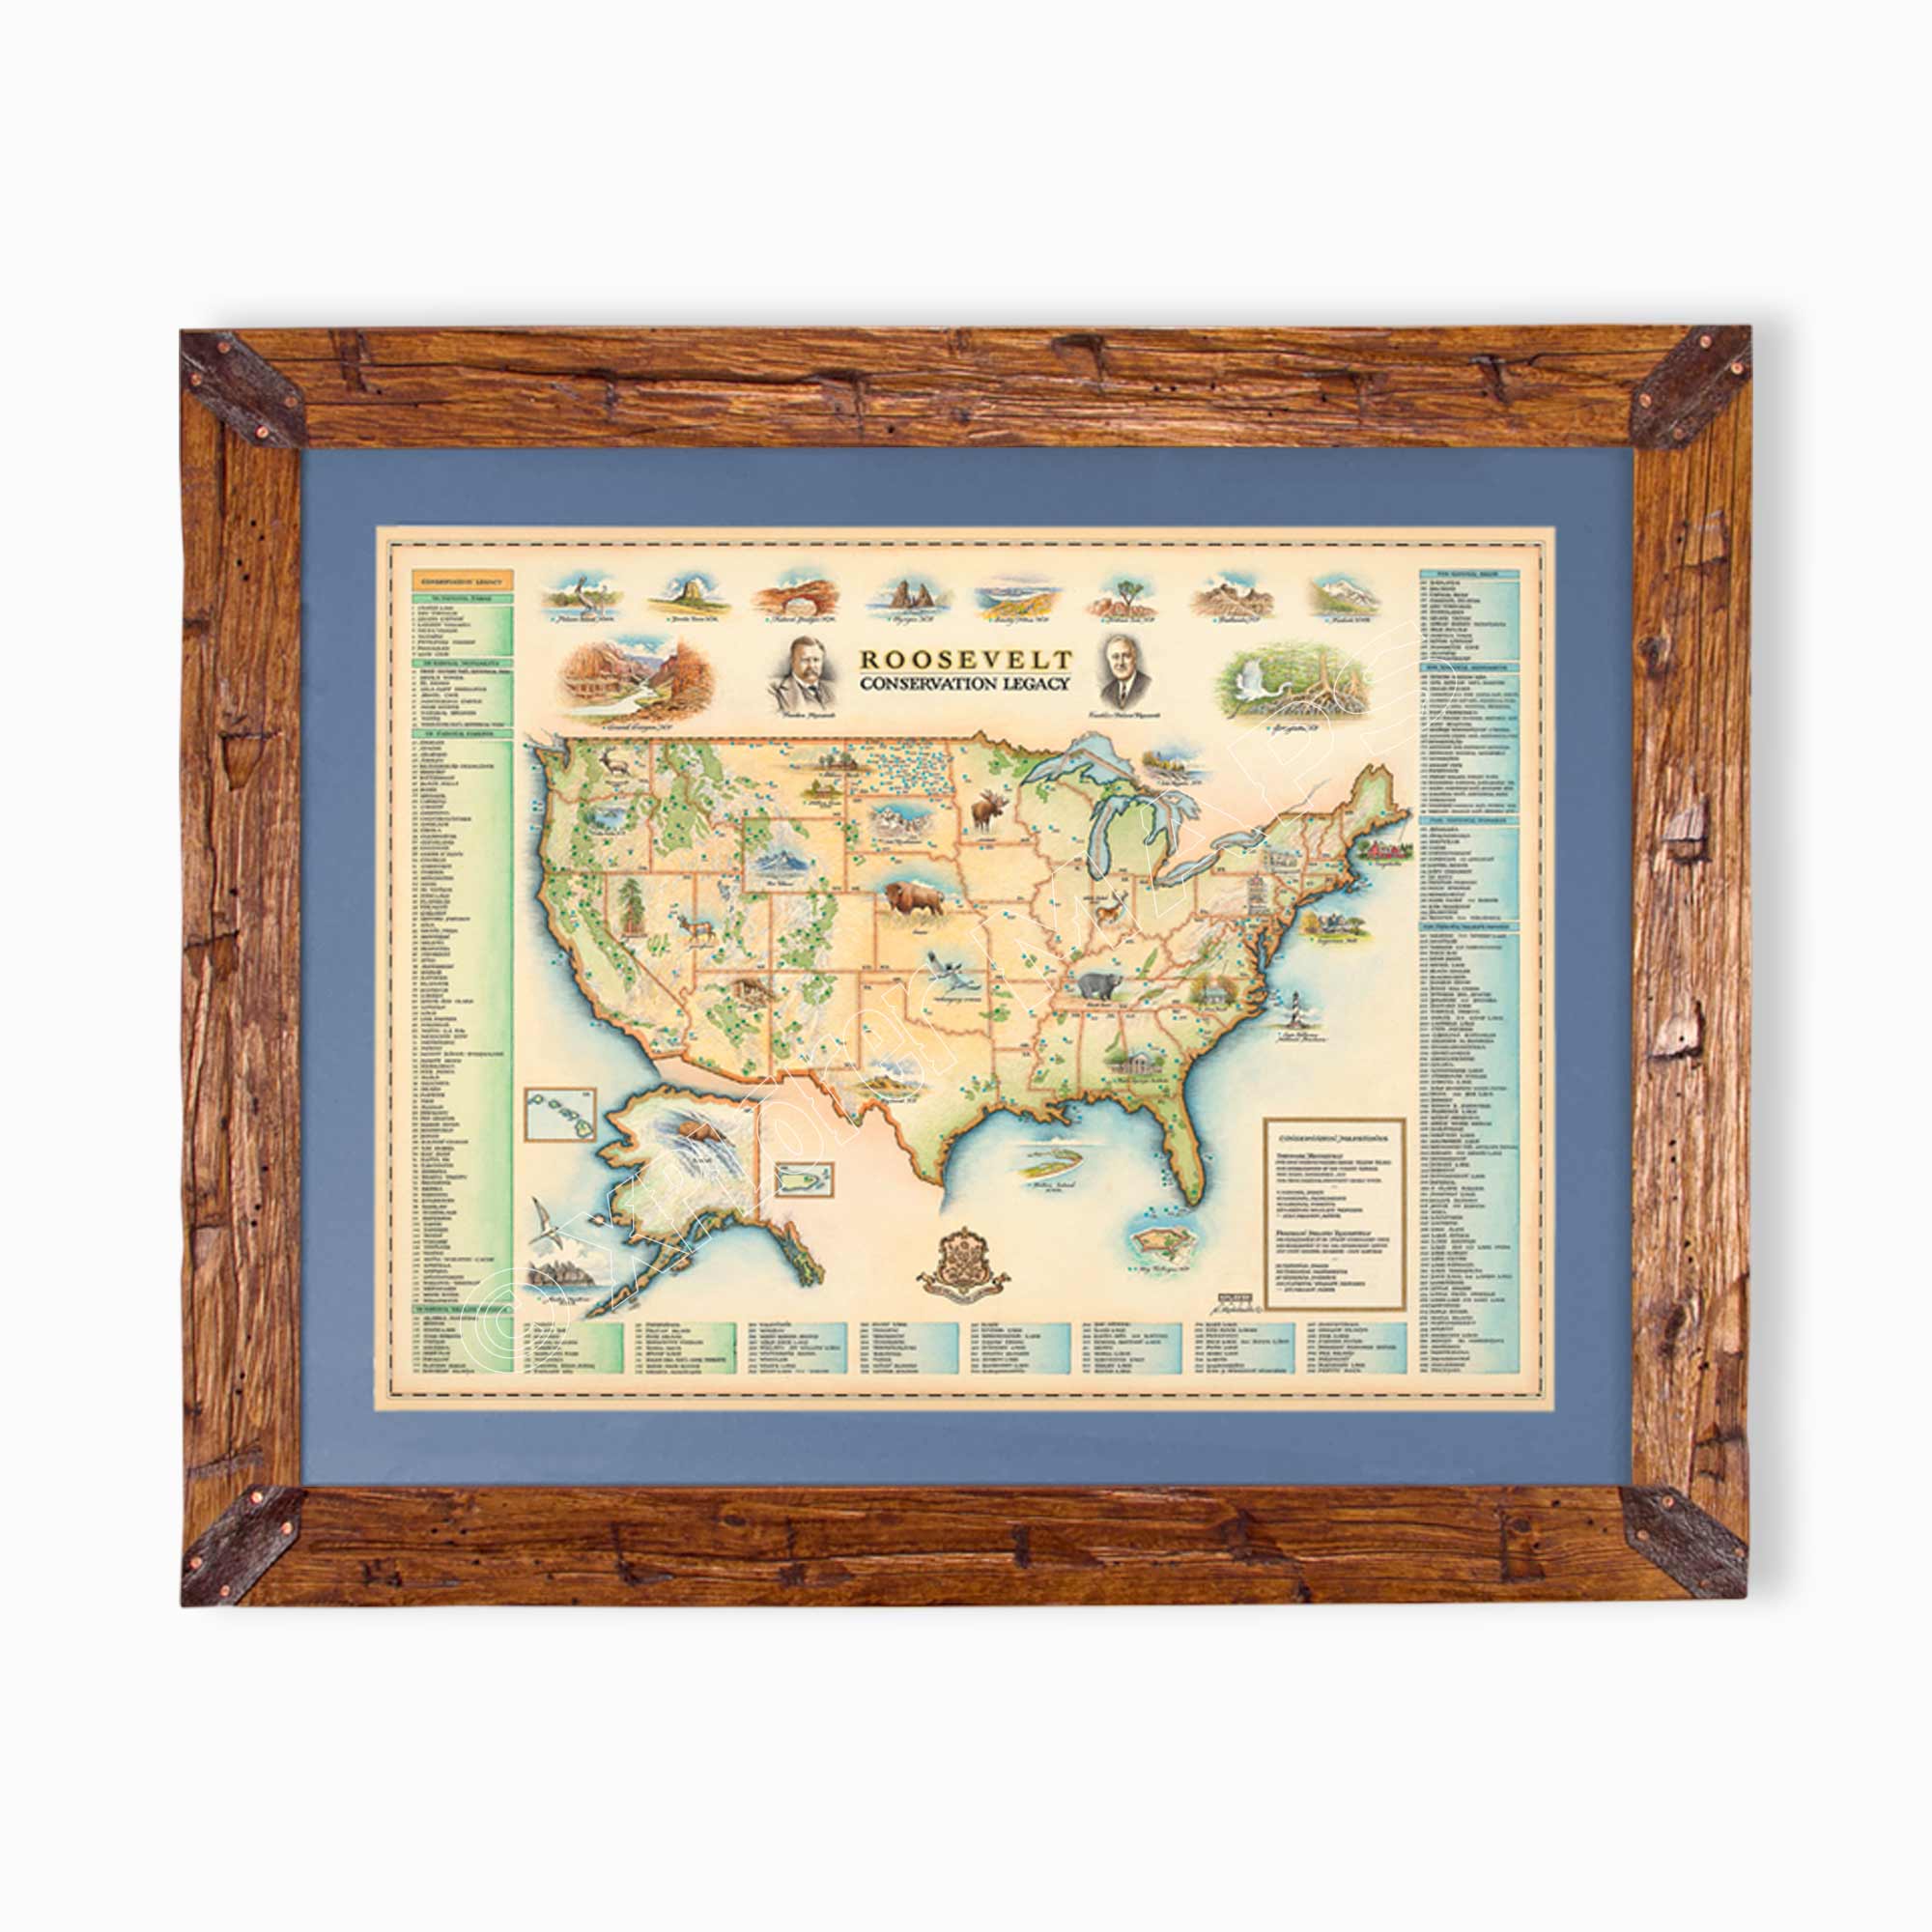 Roosevelt's USA Conservation Legacy hand-drawn map in earth tones blues and greens. The map print is framed in Montana hand-scraped pine with a blue mat.